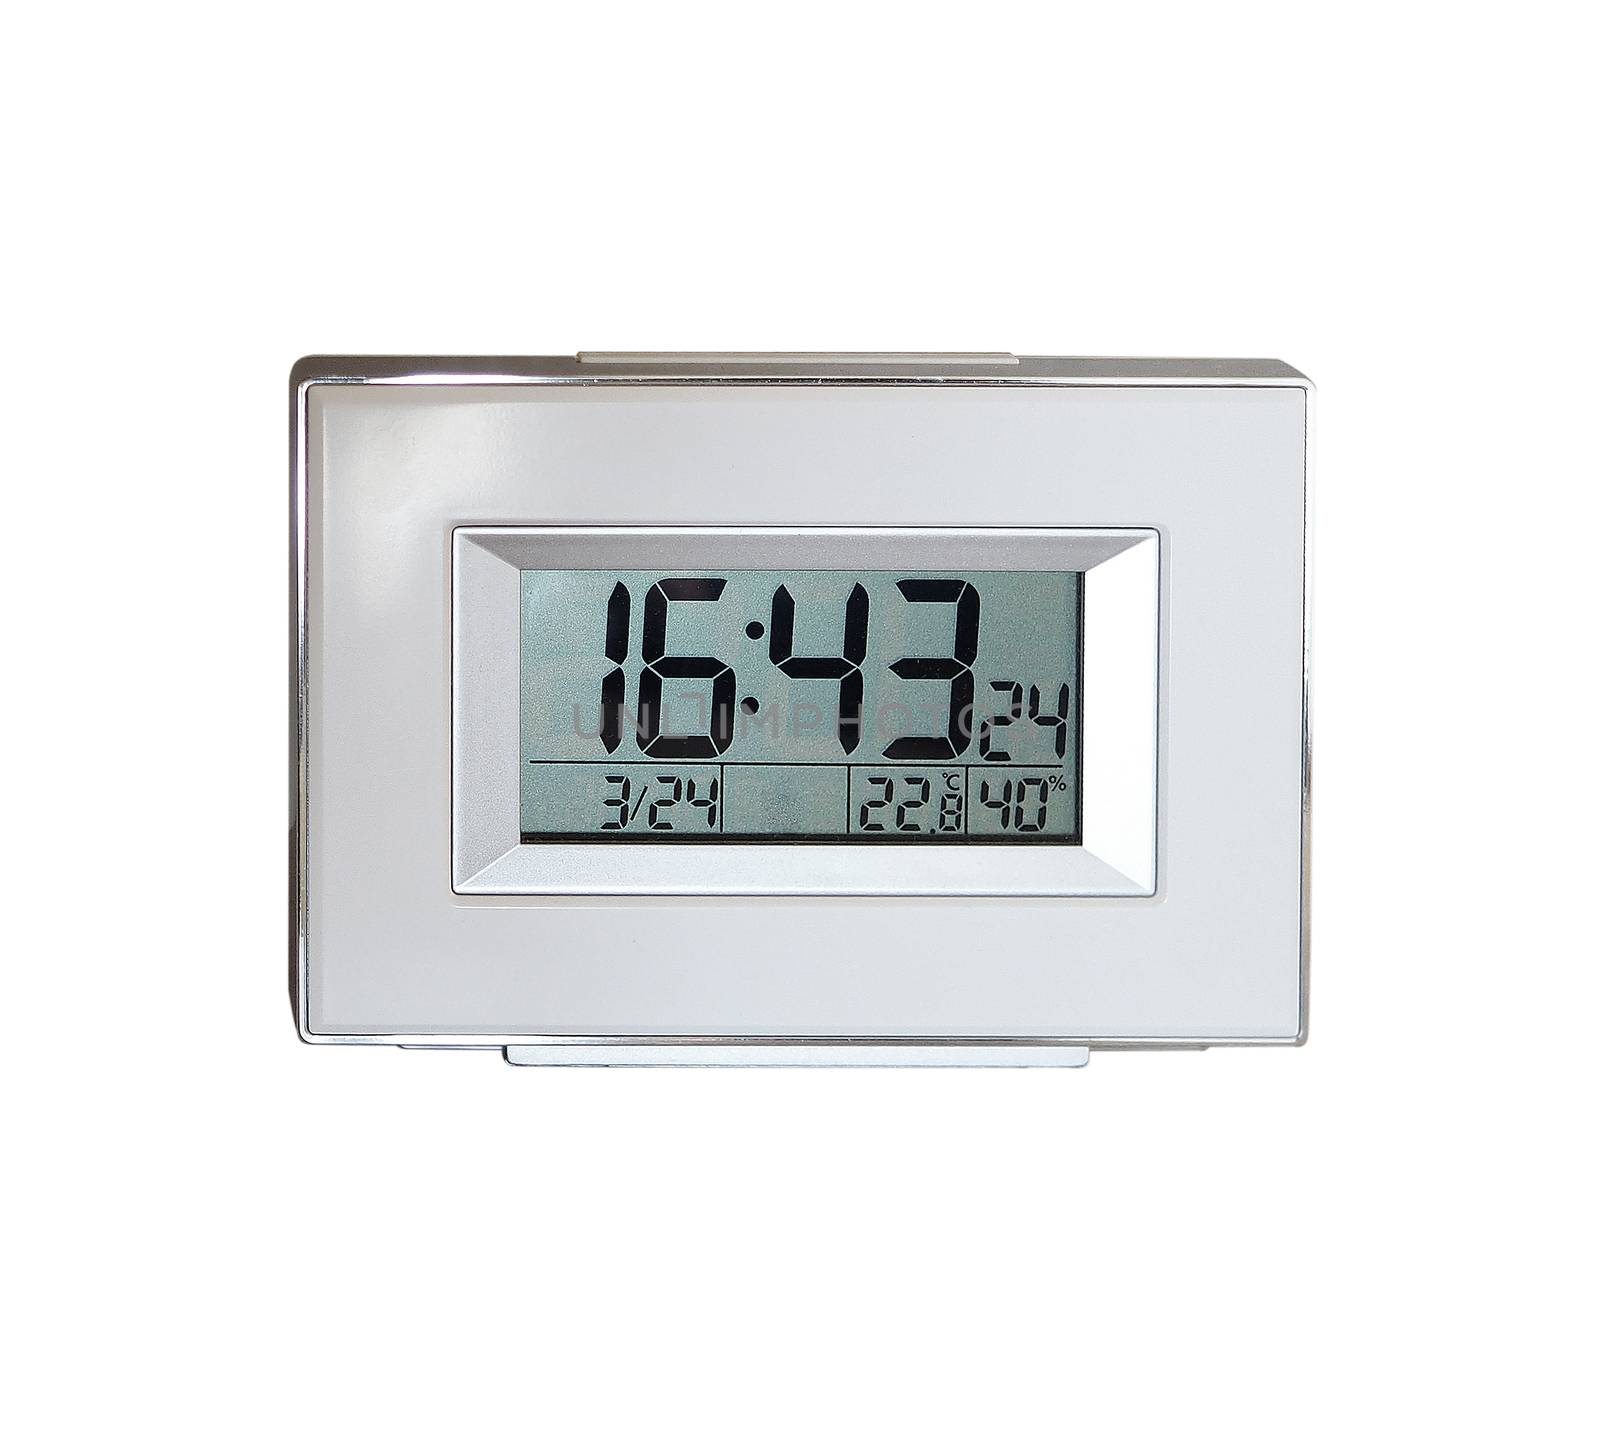 Silver color digital clock made from plastic material  by gnepphoto